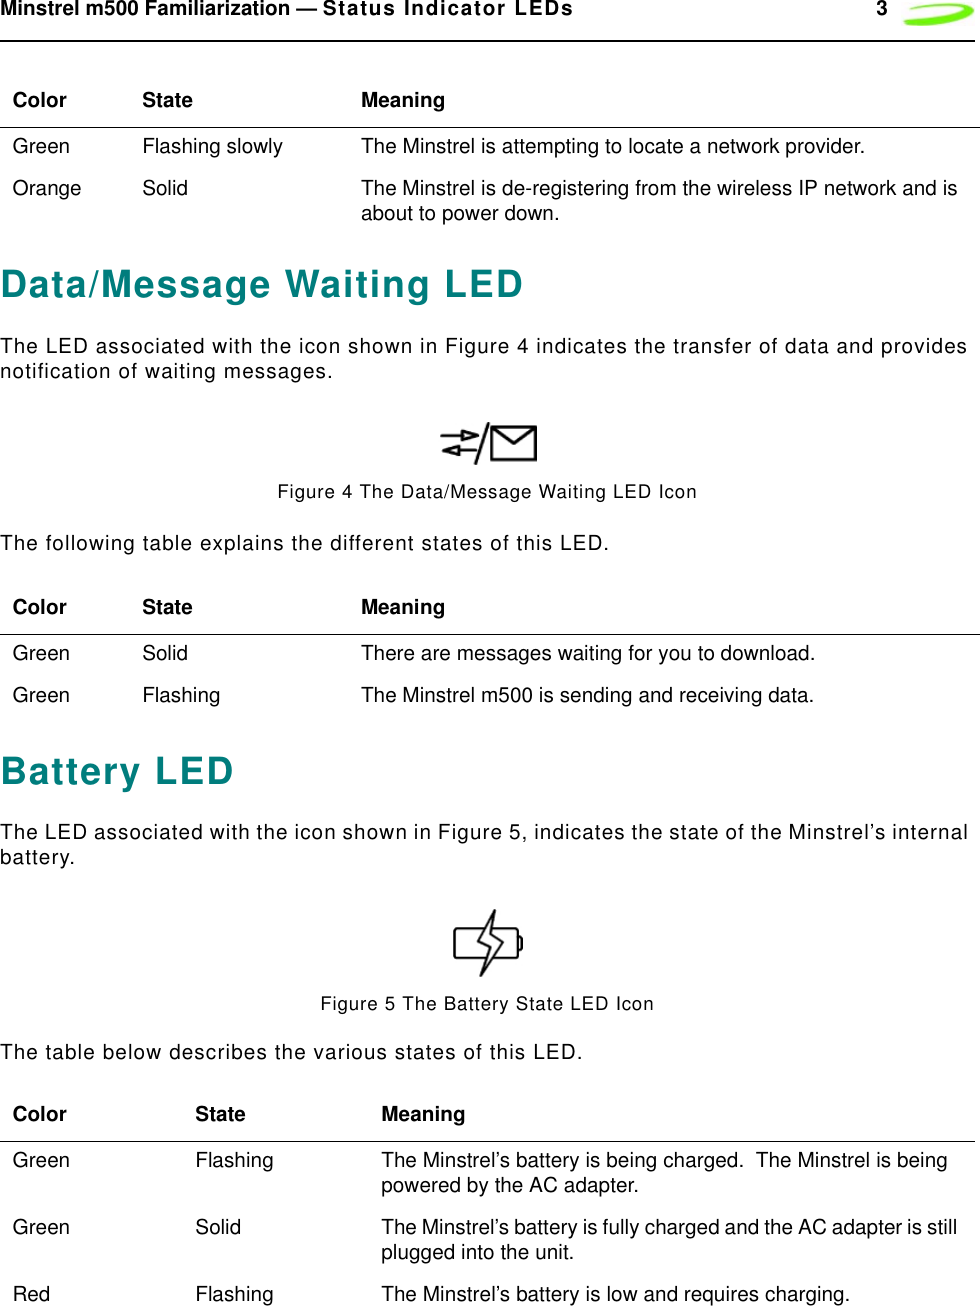 Minstrel m500 Familiarization — Status Indicator LEDs 3Data/Message Waiting LEDThe LED associated with the icon shown in Figure 4 indicates the transfer of data and provides notification of waiting messages.Figure 4 The Data/Message Waiting LED IconThe following table explains the different states of this LED.Battery LEDThe LED associated with the icon shown in Figure 5, indicates the state of the Minstrel’s internal battery.Figure 5 The Battery State LED IconThe table below describes the various states of this LED.Green Flashing slowly The Minstrel is attempting to locate a network provider.Orange Solid The Minstrel is de-registering from the wireless IP network and is about to power down.Color State MeaningGreen Solid There are messages waiting for you to download.Green Flashing The Minstrel m500 is sending and receiving data.Color State MeaningGreen Flashing The Minstrel’s battery is being charged.  The Minstrel is being powered by the AC adapter.Green Solid The Minstrel’s battery is fully charged and the AC adapter is still plugged into the unit.Red Flashing The Minstrel’s battery is low and requires charging.Color State Meaning